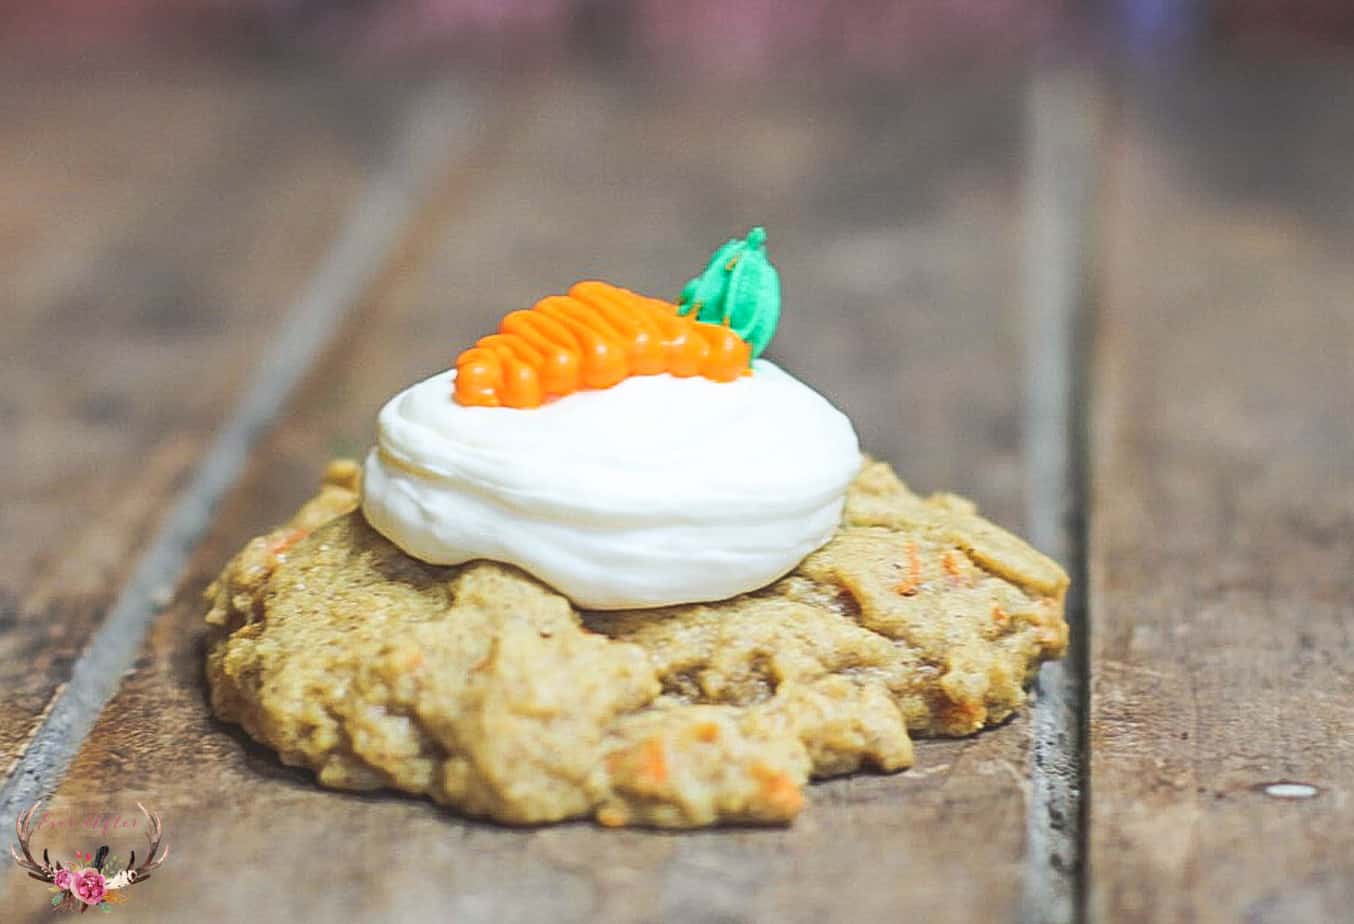  How to Make Carrot Cake Cookies with Cream Cheese Frosting